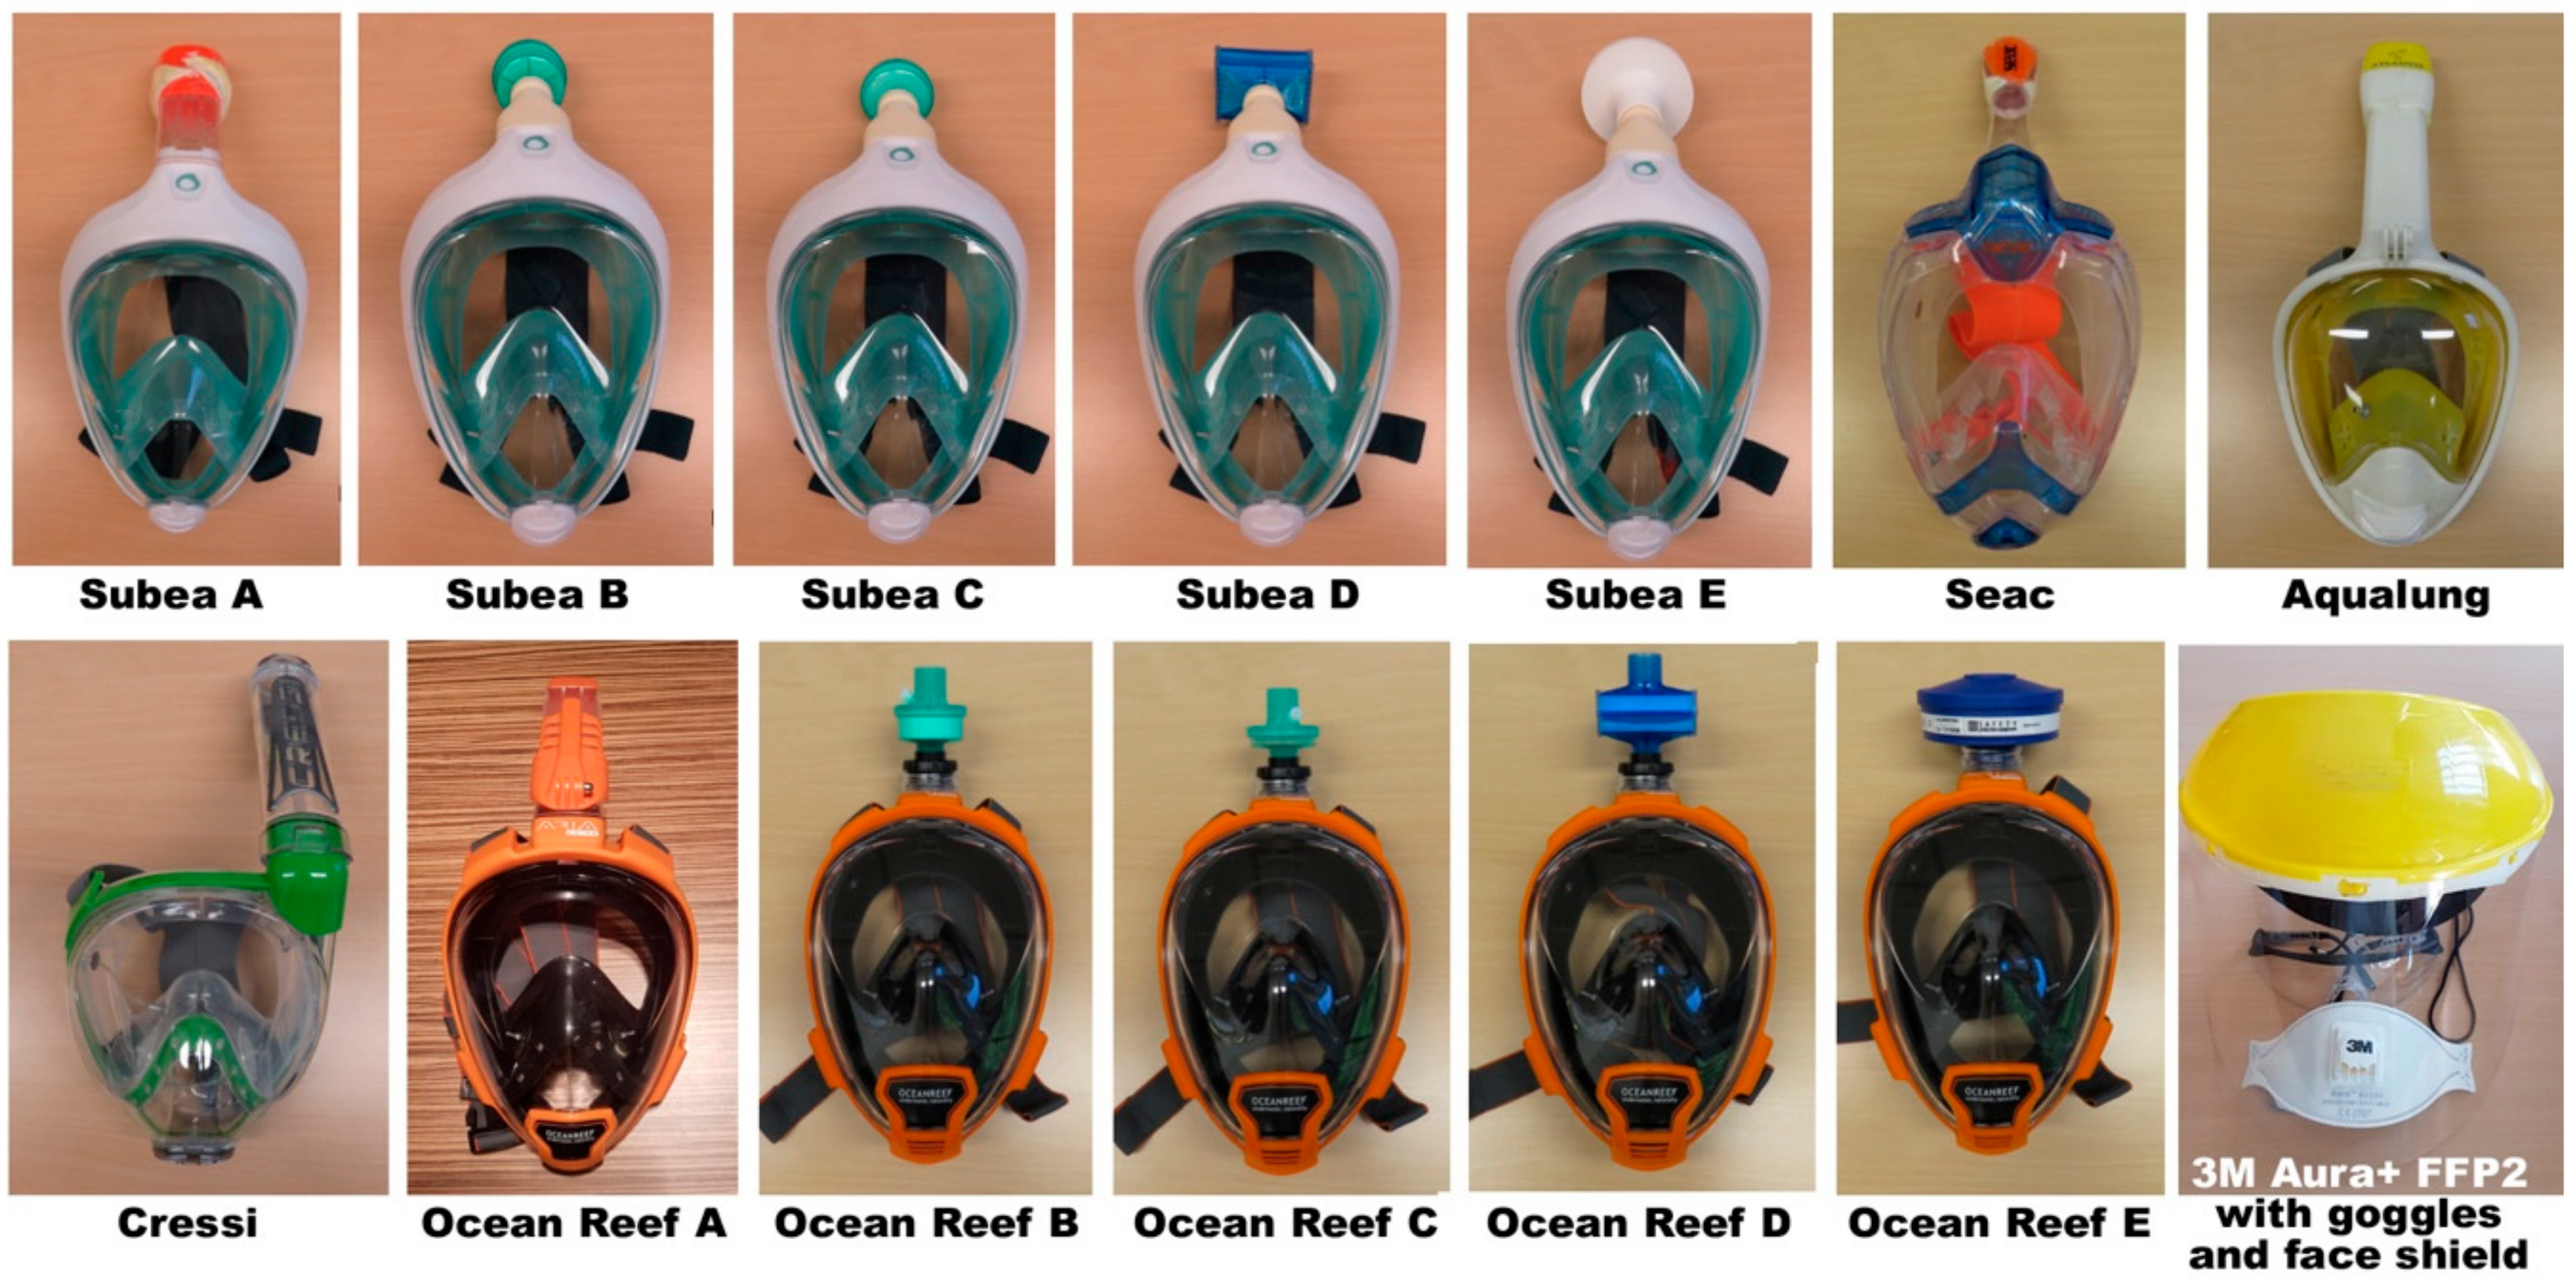 | Free Full-Text | Protection Level, Respiratory Safety, and Practical Aspects of Commercially Available Snorkel Masks as Personal Protection Devices Against Contaminants and SARS-CoV2